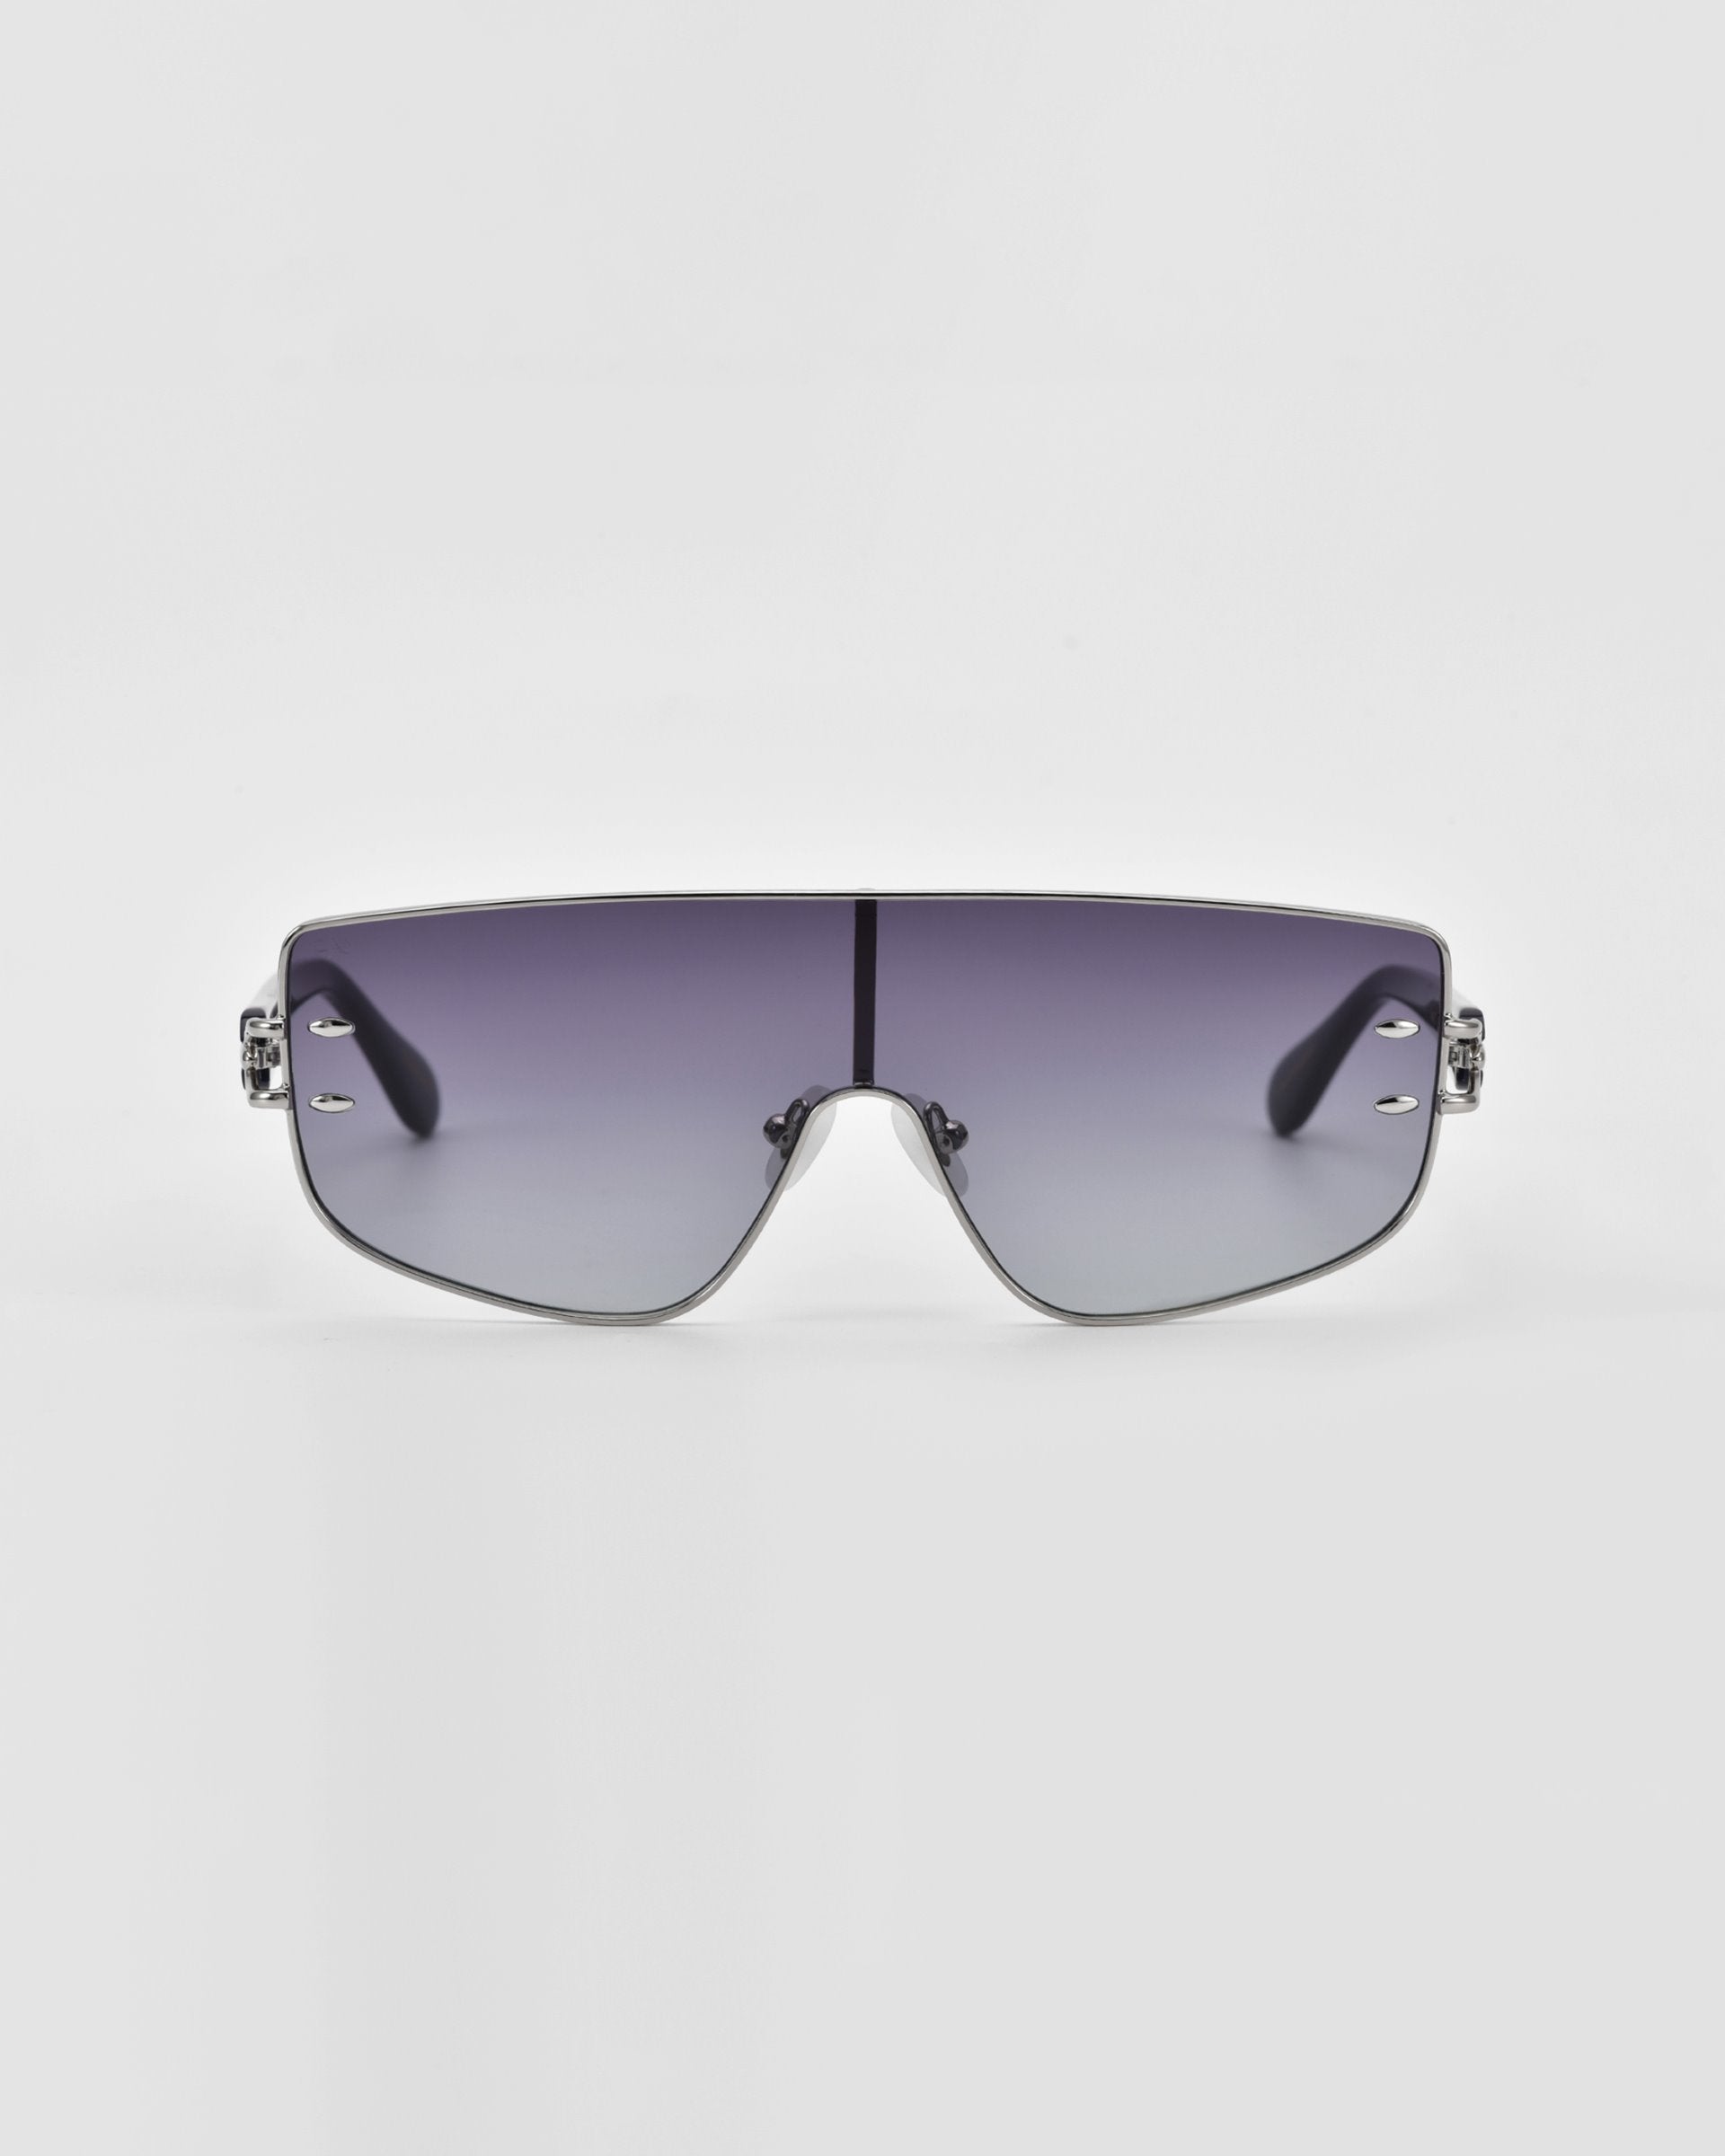 A pair of stylish, oversized For Art's Sake® Flare sunglasses with a silver frame and gradient lenses. The lenses transition from dark at the top to lighter at the bottom, and the frame has minimalistic, sleek detailing. This luxury eyewear piece stands out against a plain white background with its futuristic design.